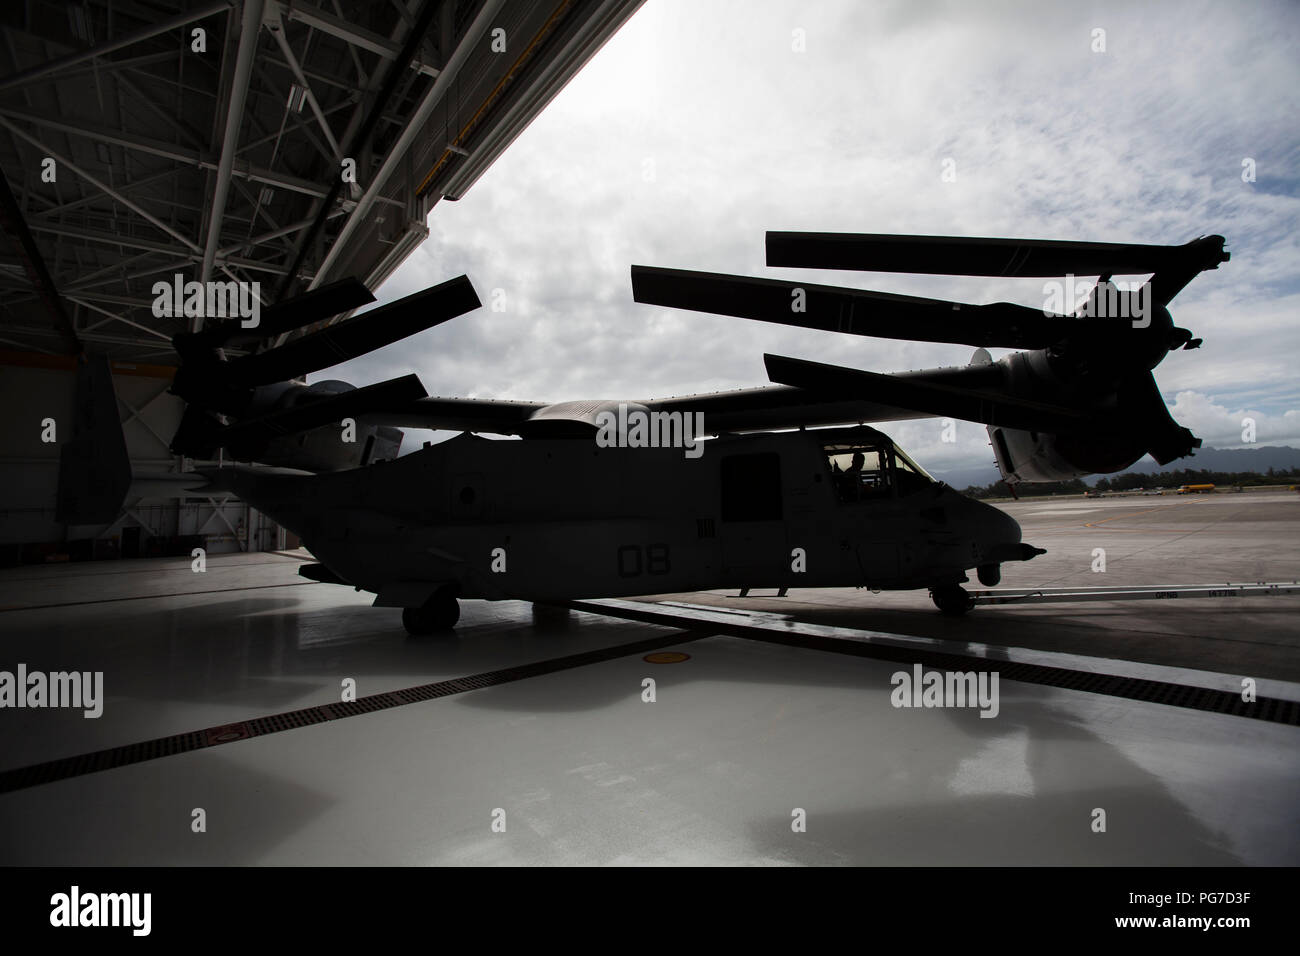 U.S. Marines park an MV-22 Osprey aircraft inside Hangar 7 prior to Hurricane Lane’s arrival at Marine Corps Air Station (MCAS) Kaneohe Bay, Marine Corps Base Hawaii (MCBH), Aug. 22, 2018. For safety and protection of assets, U.S. Marines conduct hurricane preparations aboard the installation. (U.S. Marine Corps photo by Sgt. Jesus Sepulveda Torres) Stock Photo